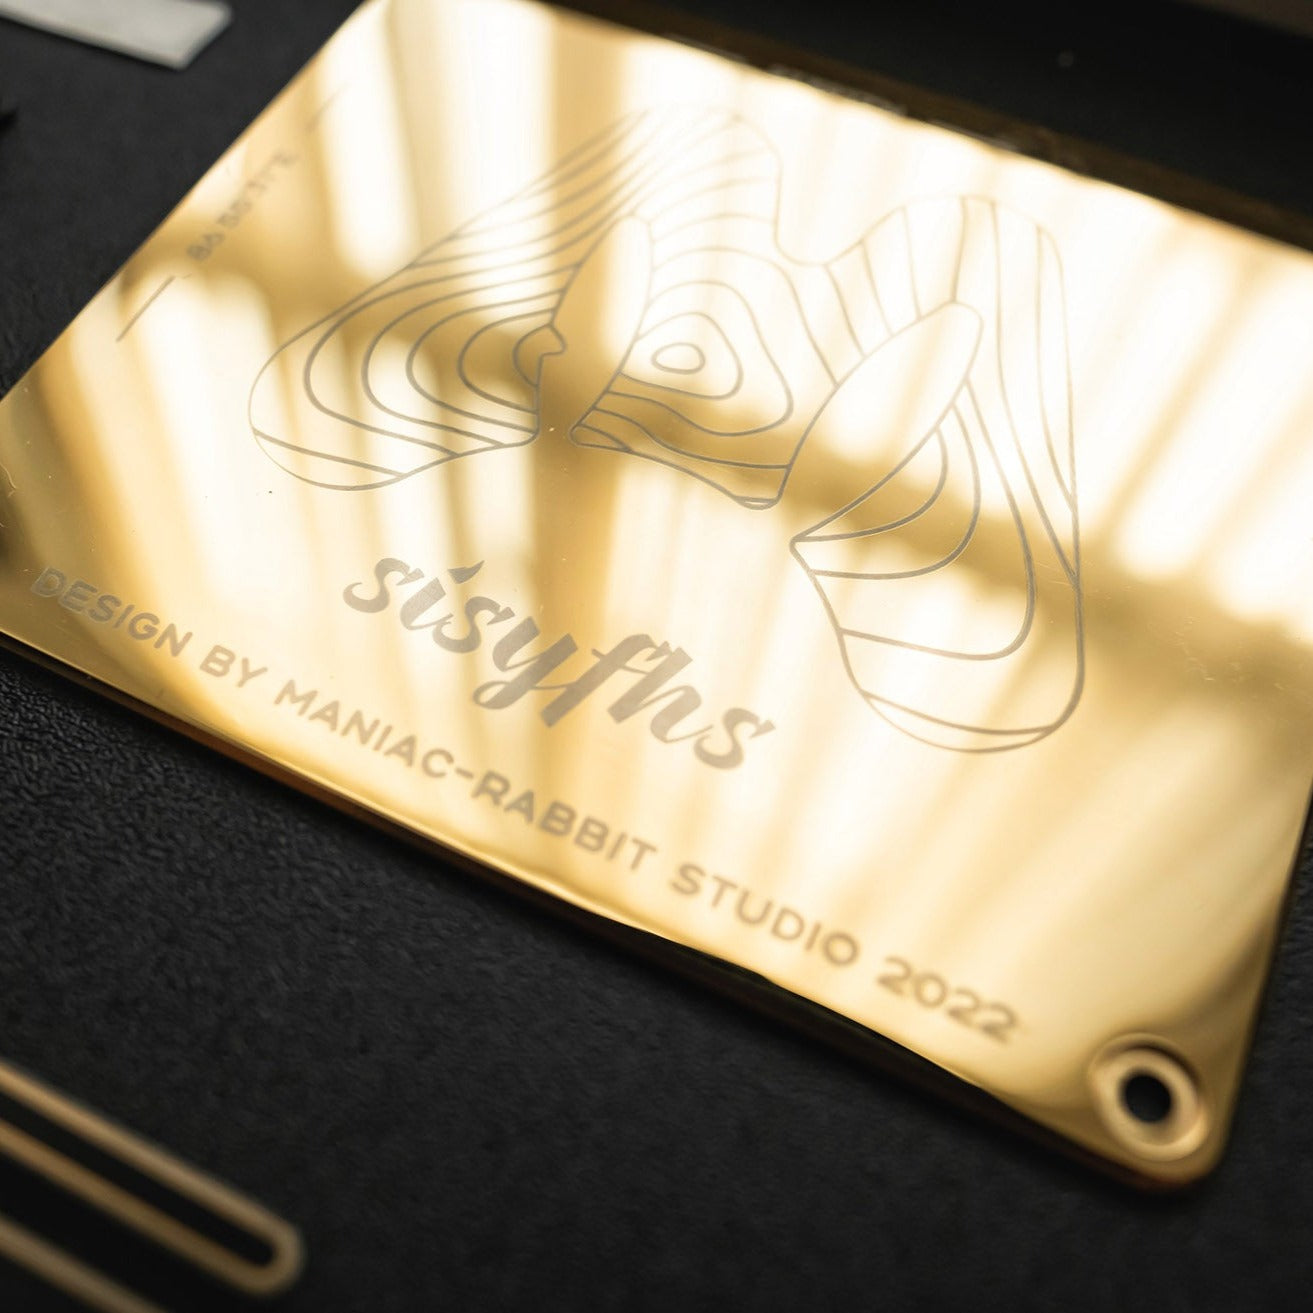 SISYPHUS65 - GOLD CHAMFERS, GOLD CYLINDER WEIGHT, DUAL-COLOR ANODIZED BADGE, MORSE CODE, NO FLEX CUT PCB